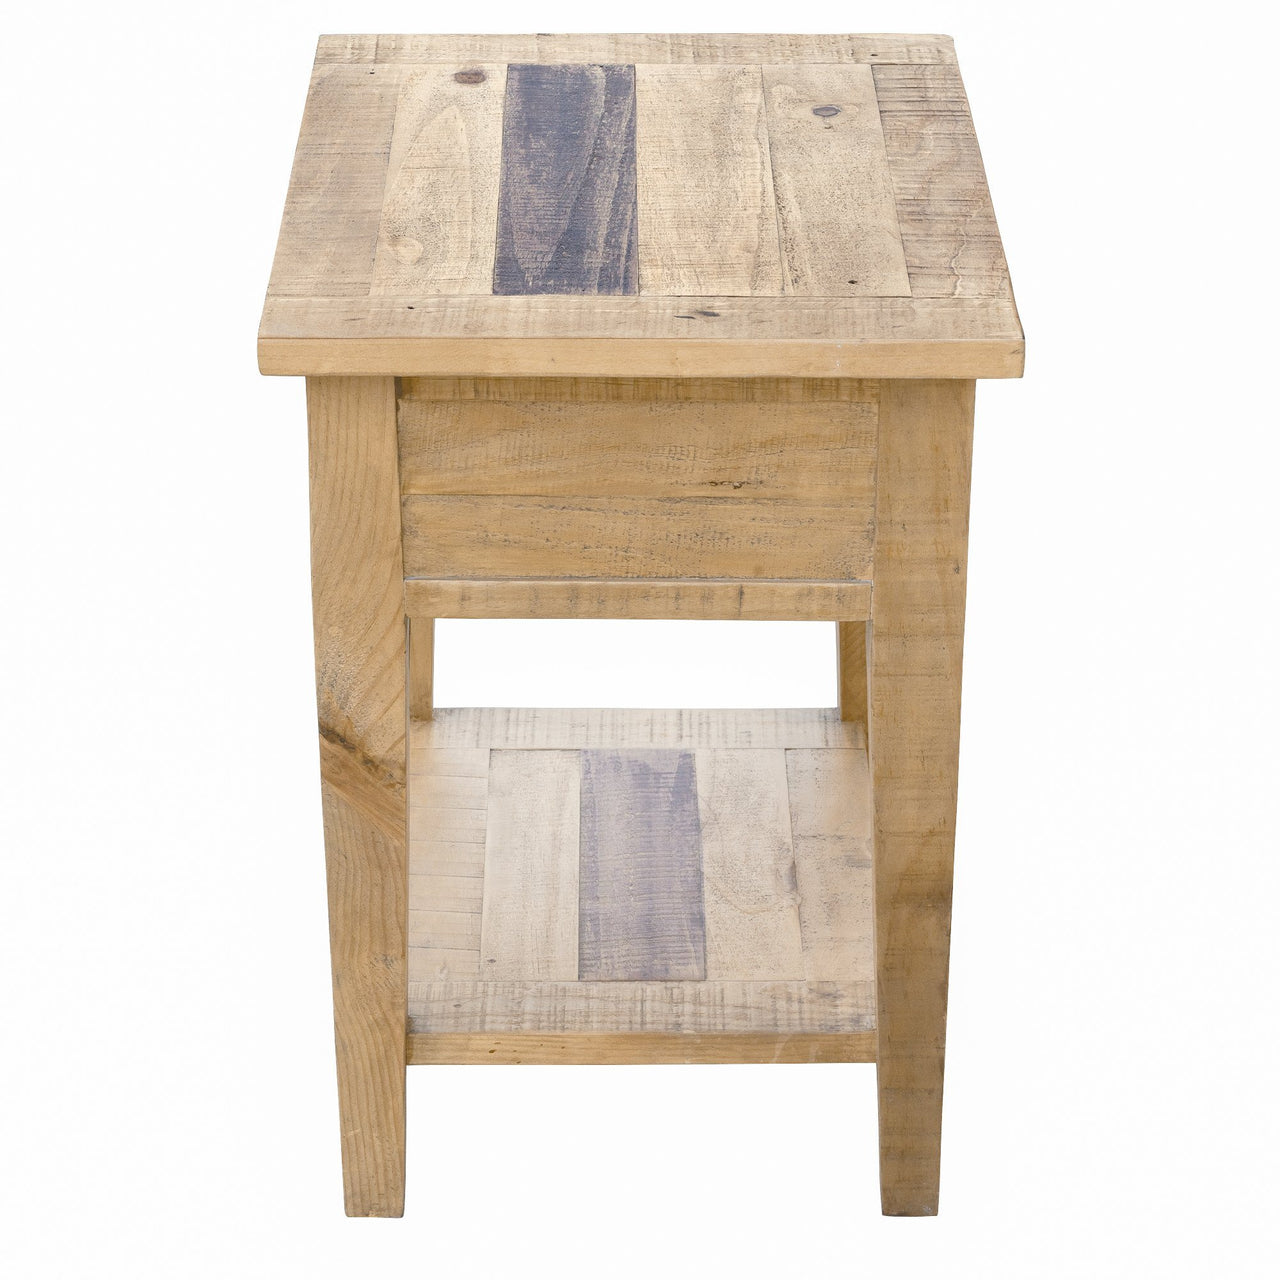 Ashford 20" Reclaimed Wood Lamp Table with Storage Shelf and One Drawer End Table AndMakers 